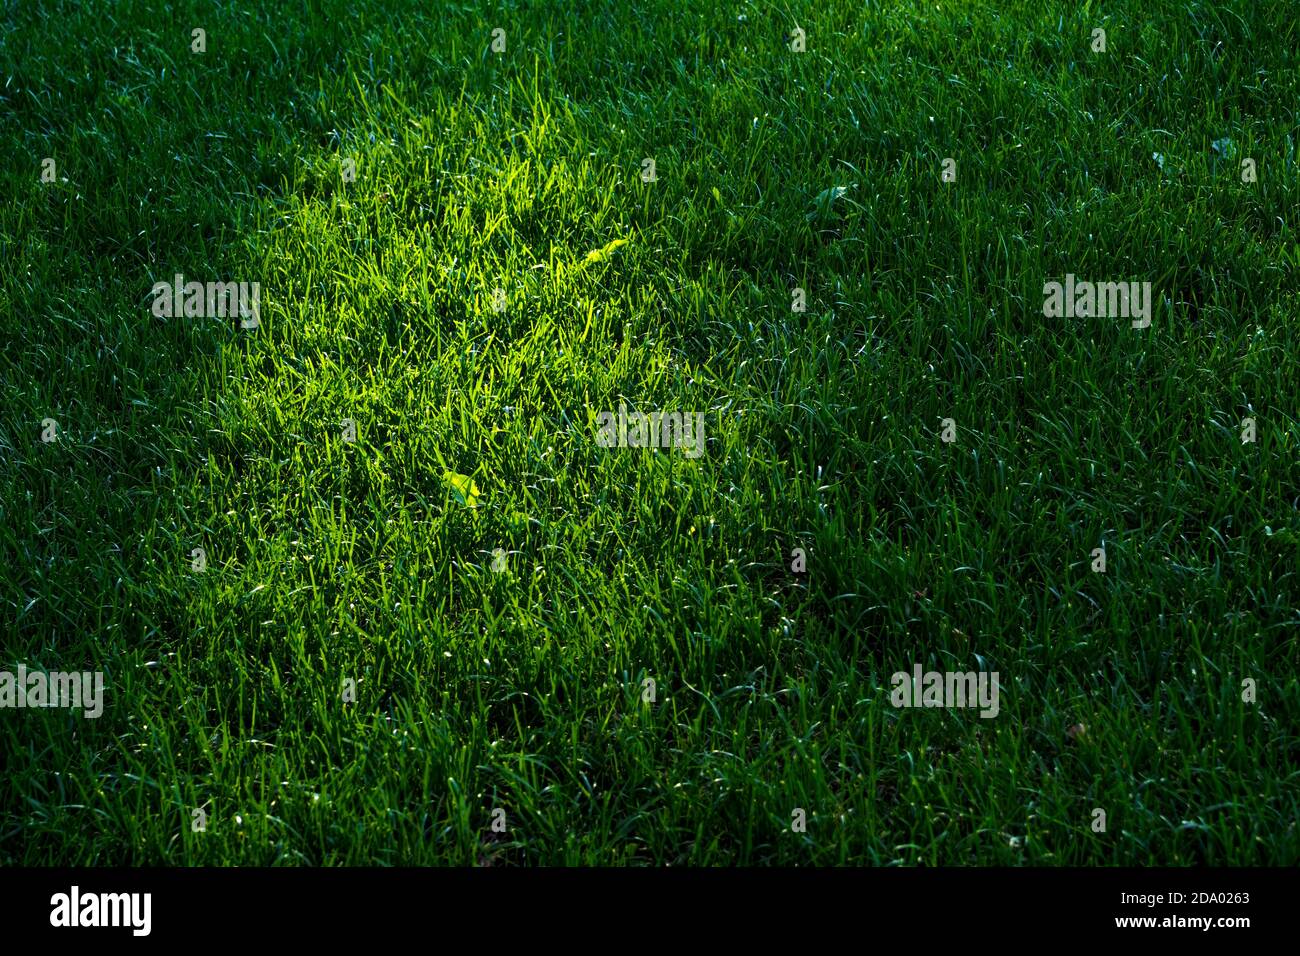 Green lawn in shadows and sunlight, grass background, selective focus, copy space. Stock Photo